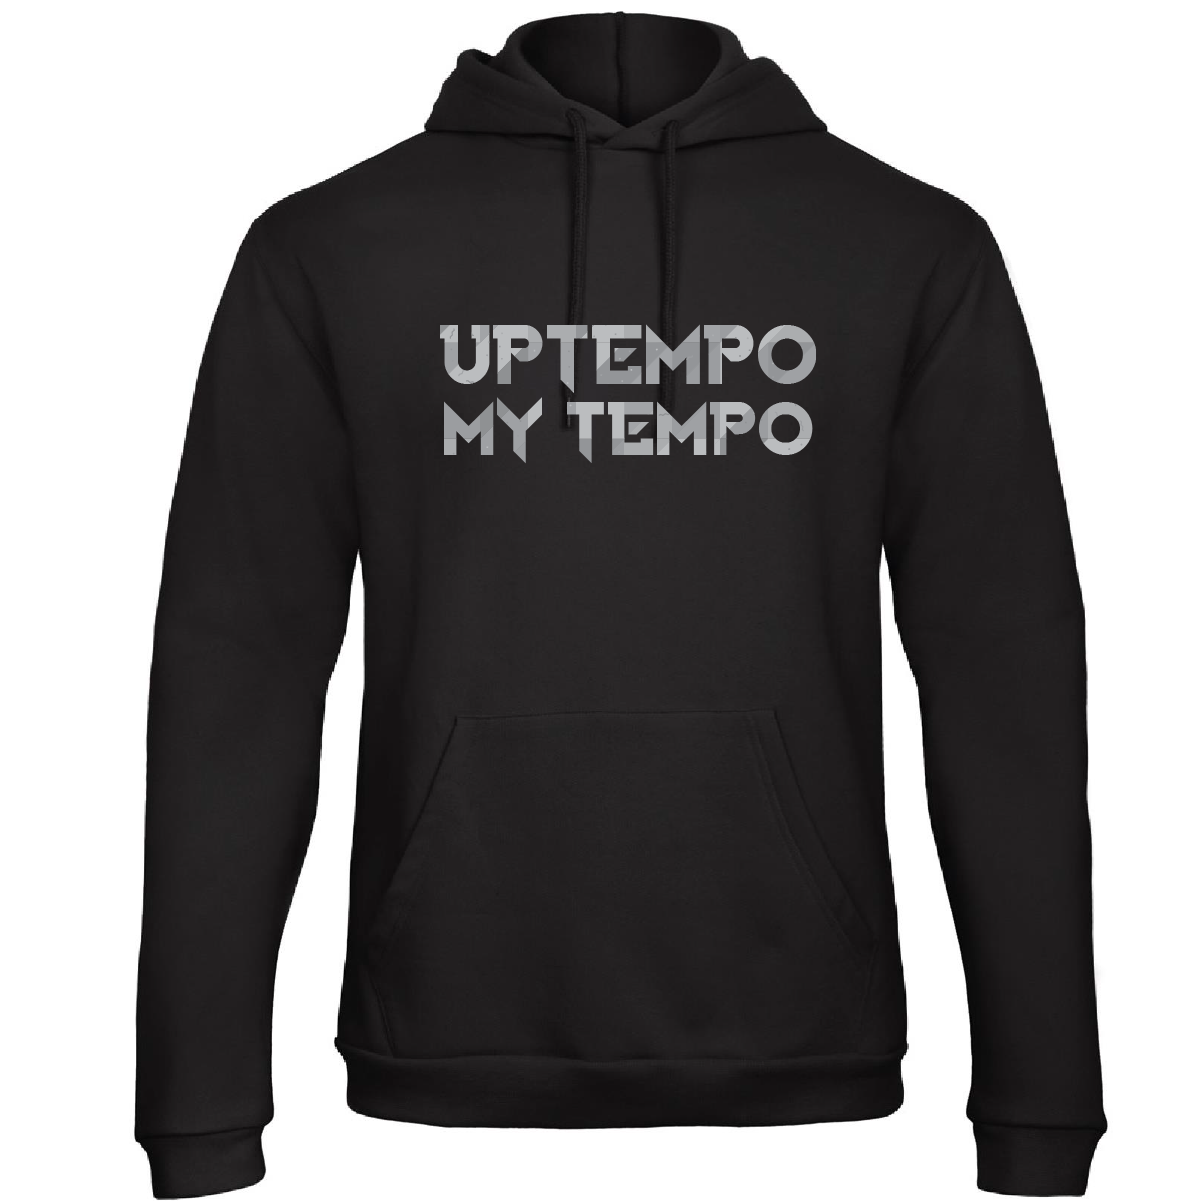 uptempo is my tempo hoodie sweater – 4XL